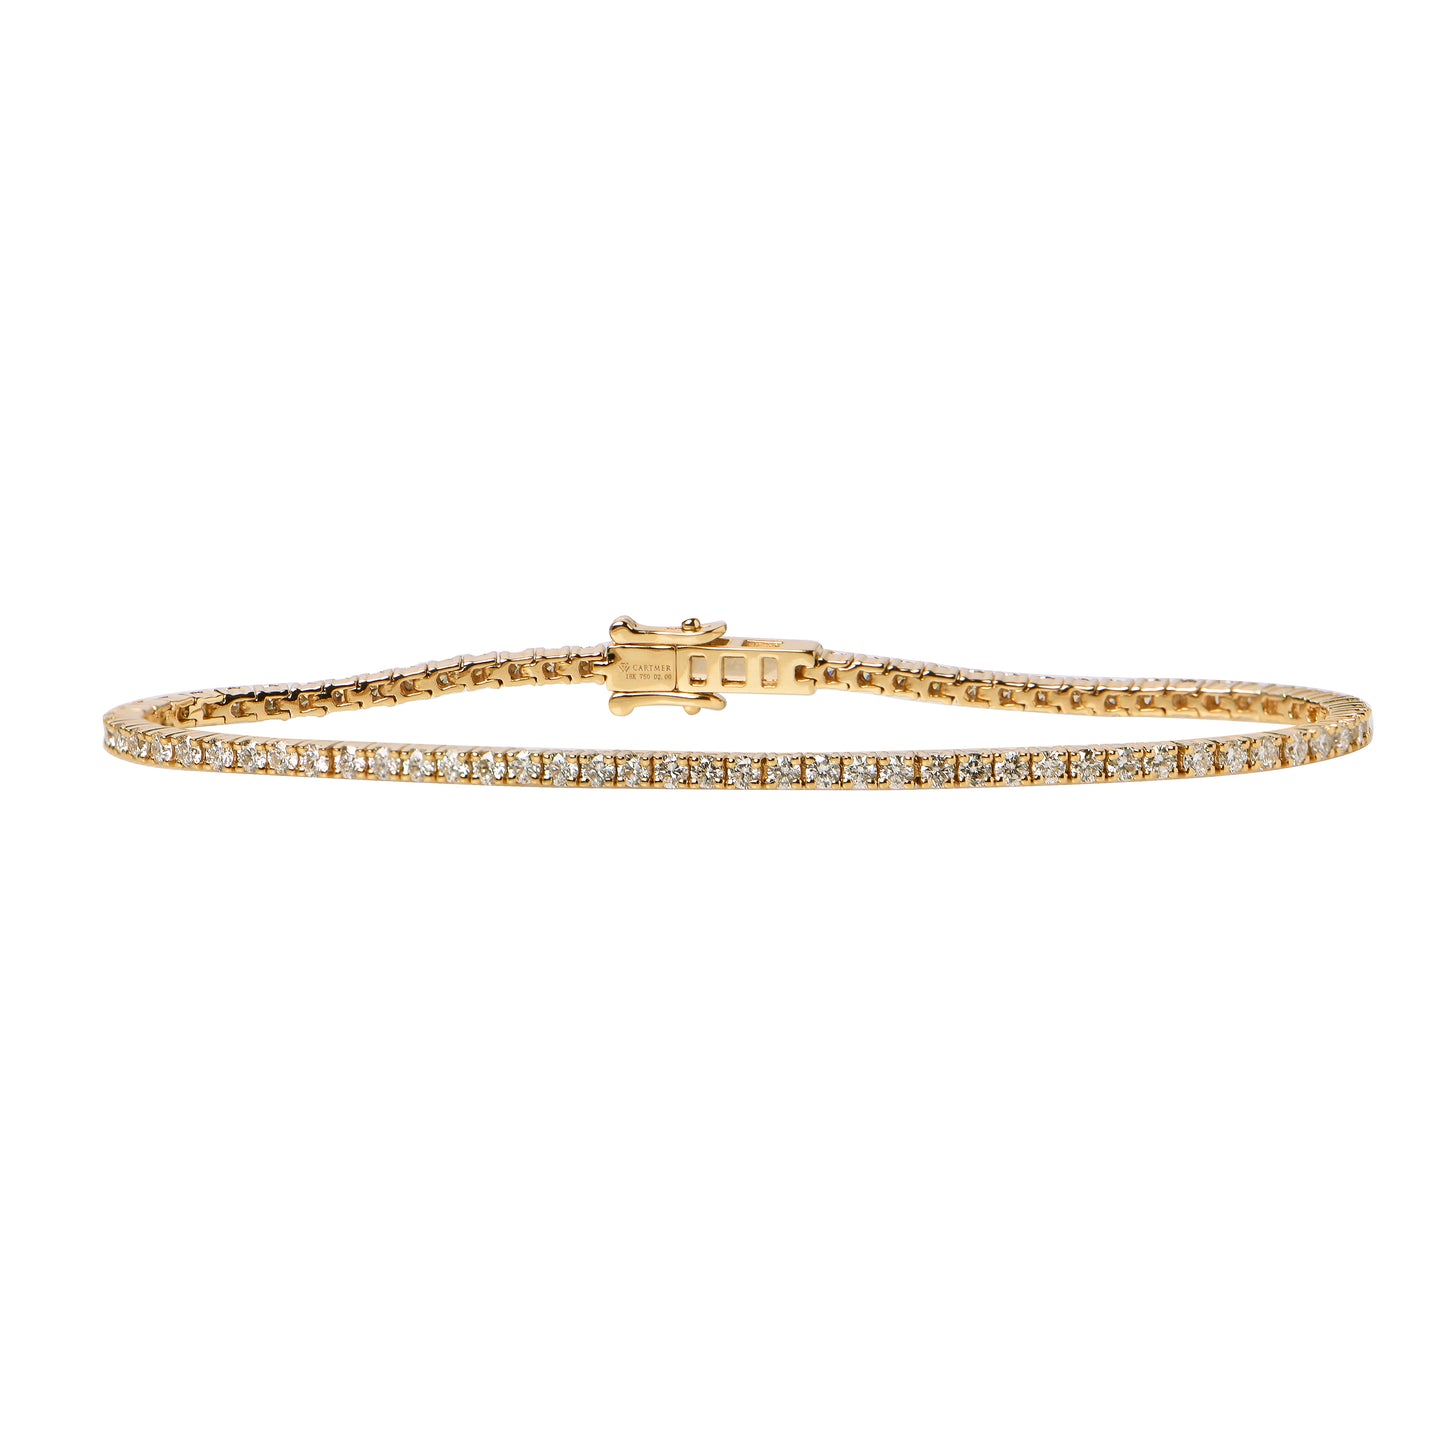 4.80ct to 6.00ct Diamond Tennis Bracelet in 18ct White, Yellow or Rose Gold